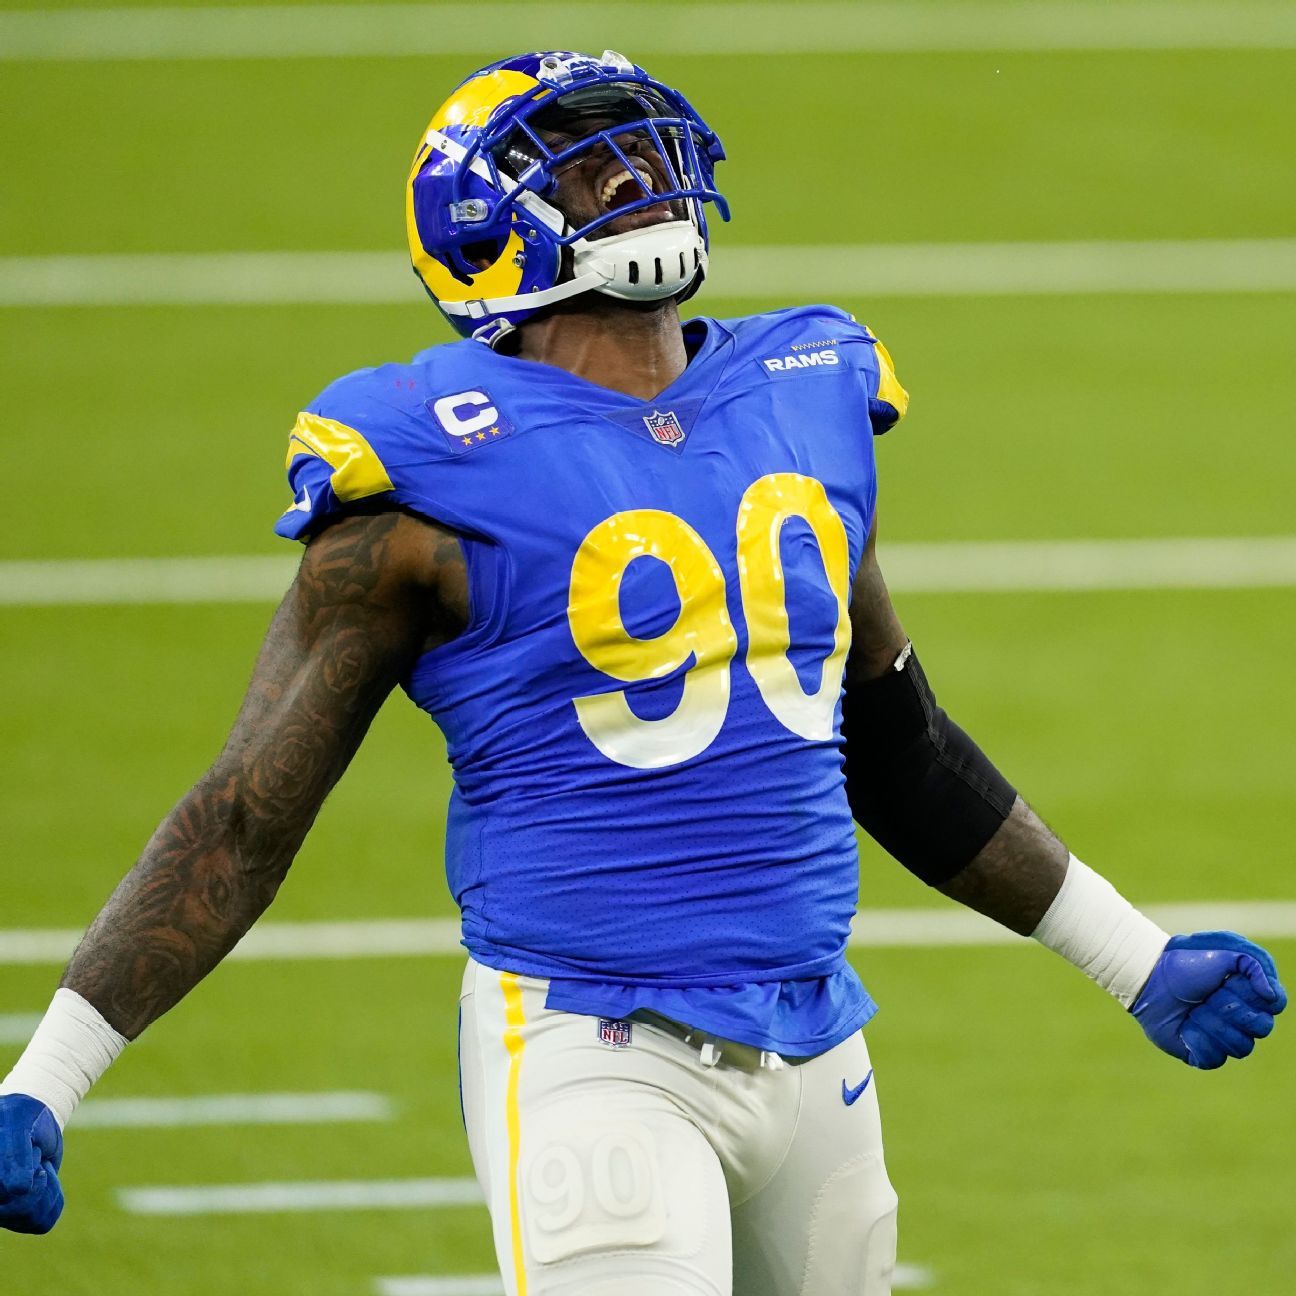 Los Angeles Rams DL Michael Brockers traded to Detroit Lions, says the source